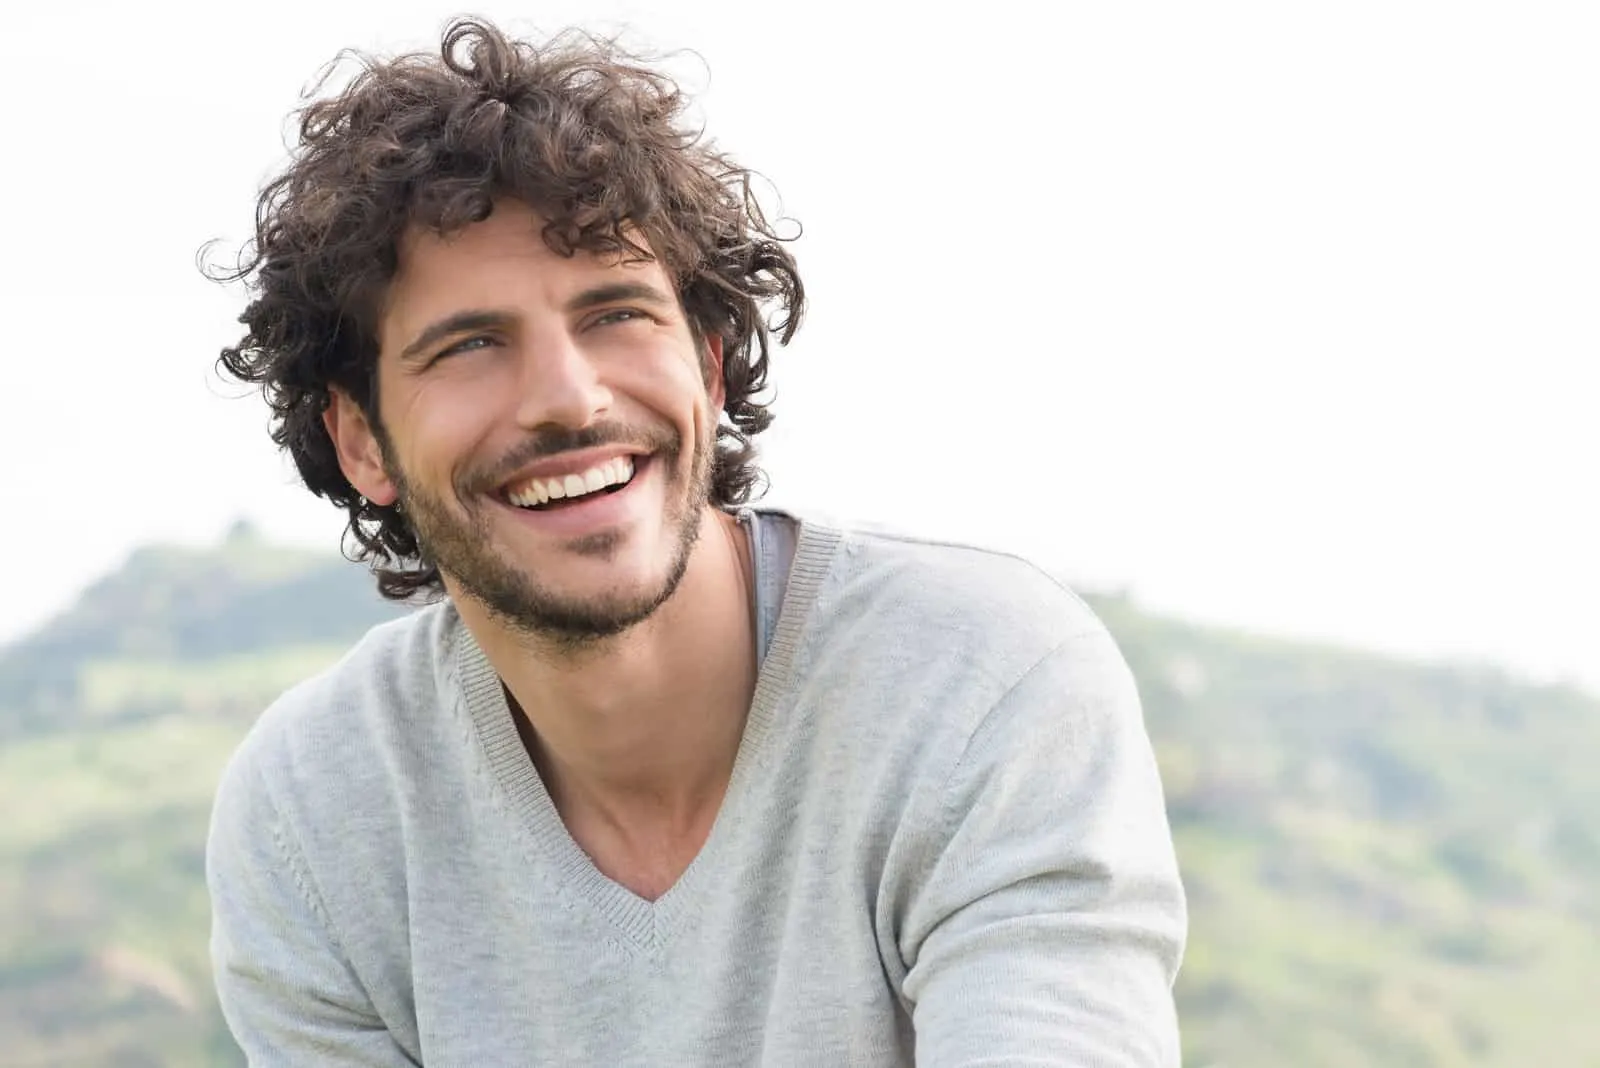 handsome man with curly hair smiling outdoor